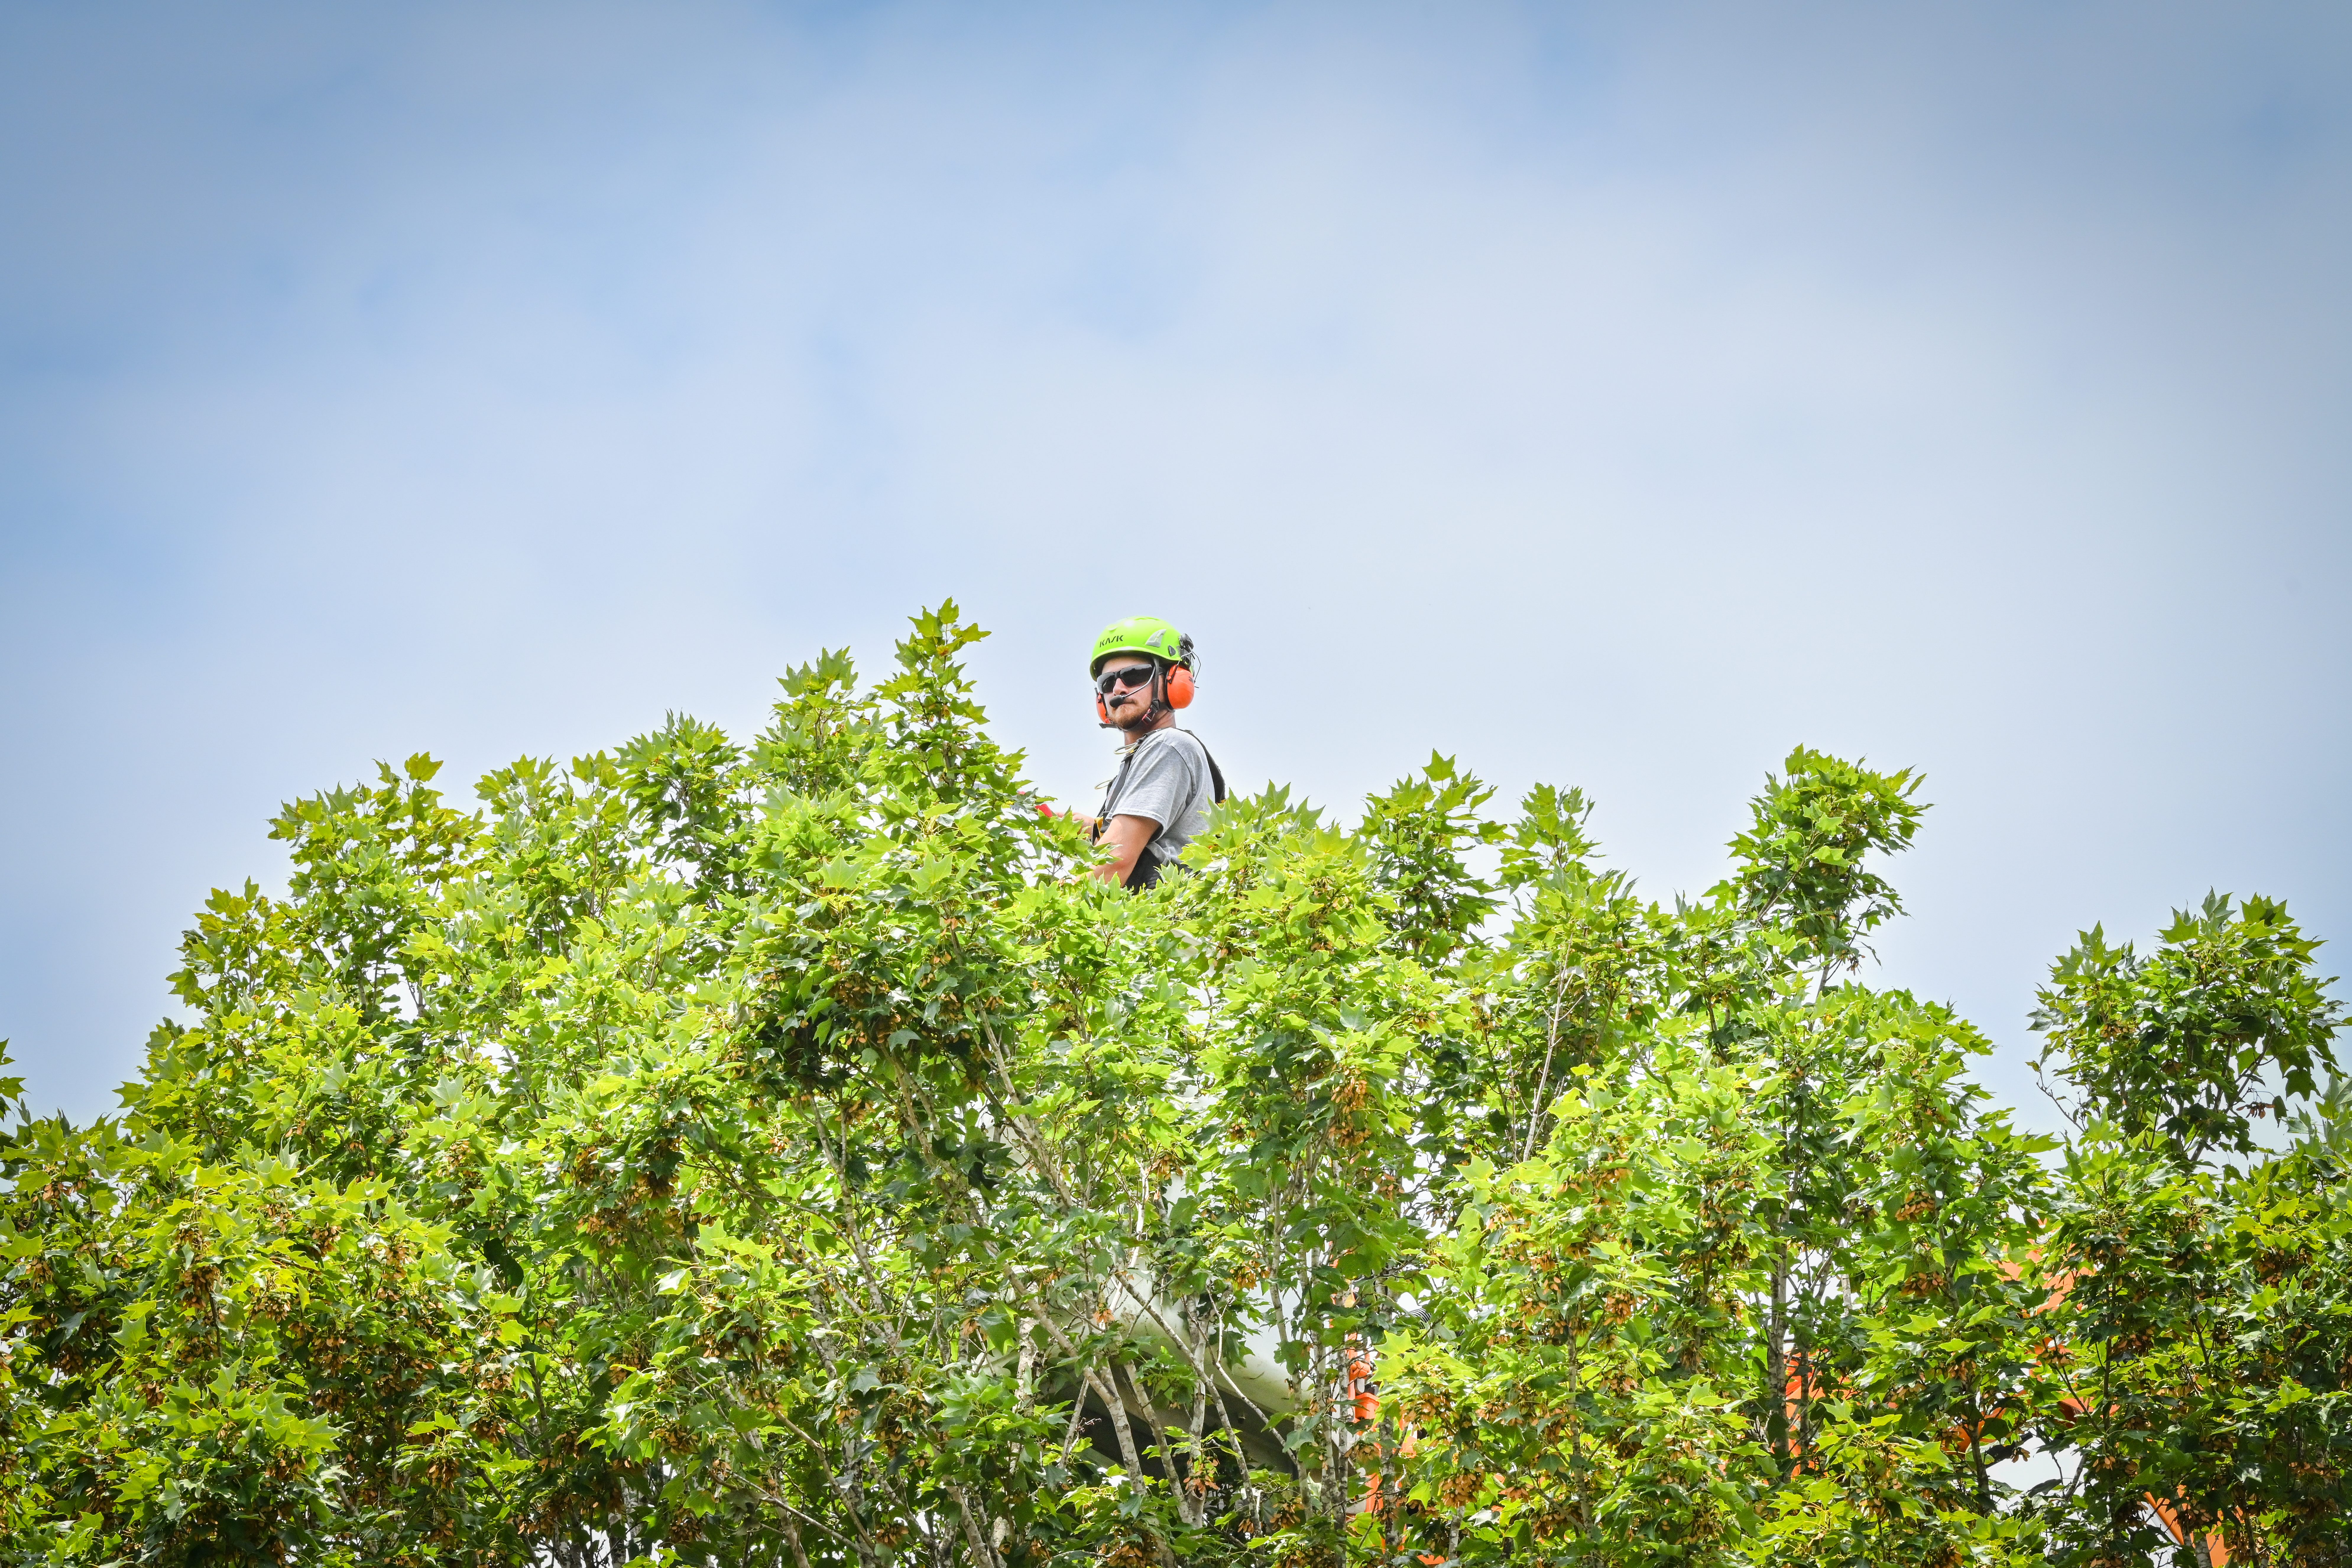 A man wearing a helmet pokes his head out from the top of a tree